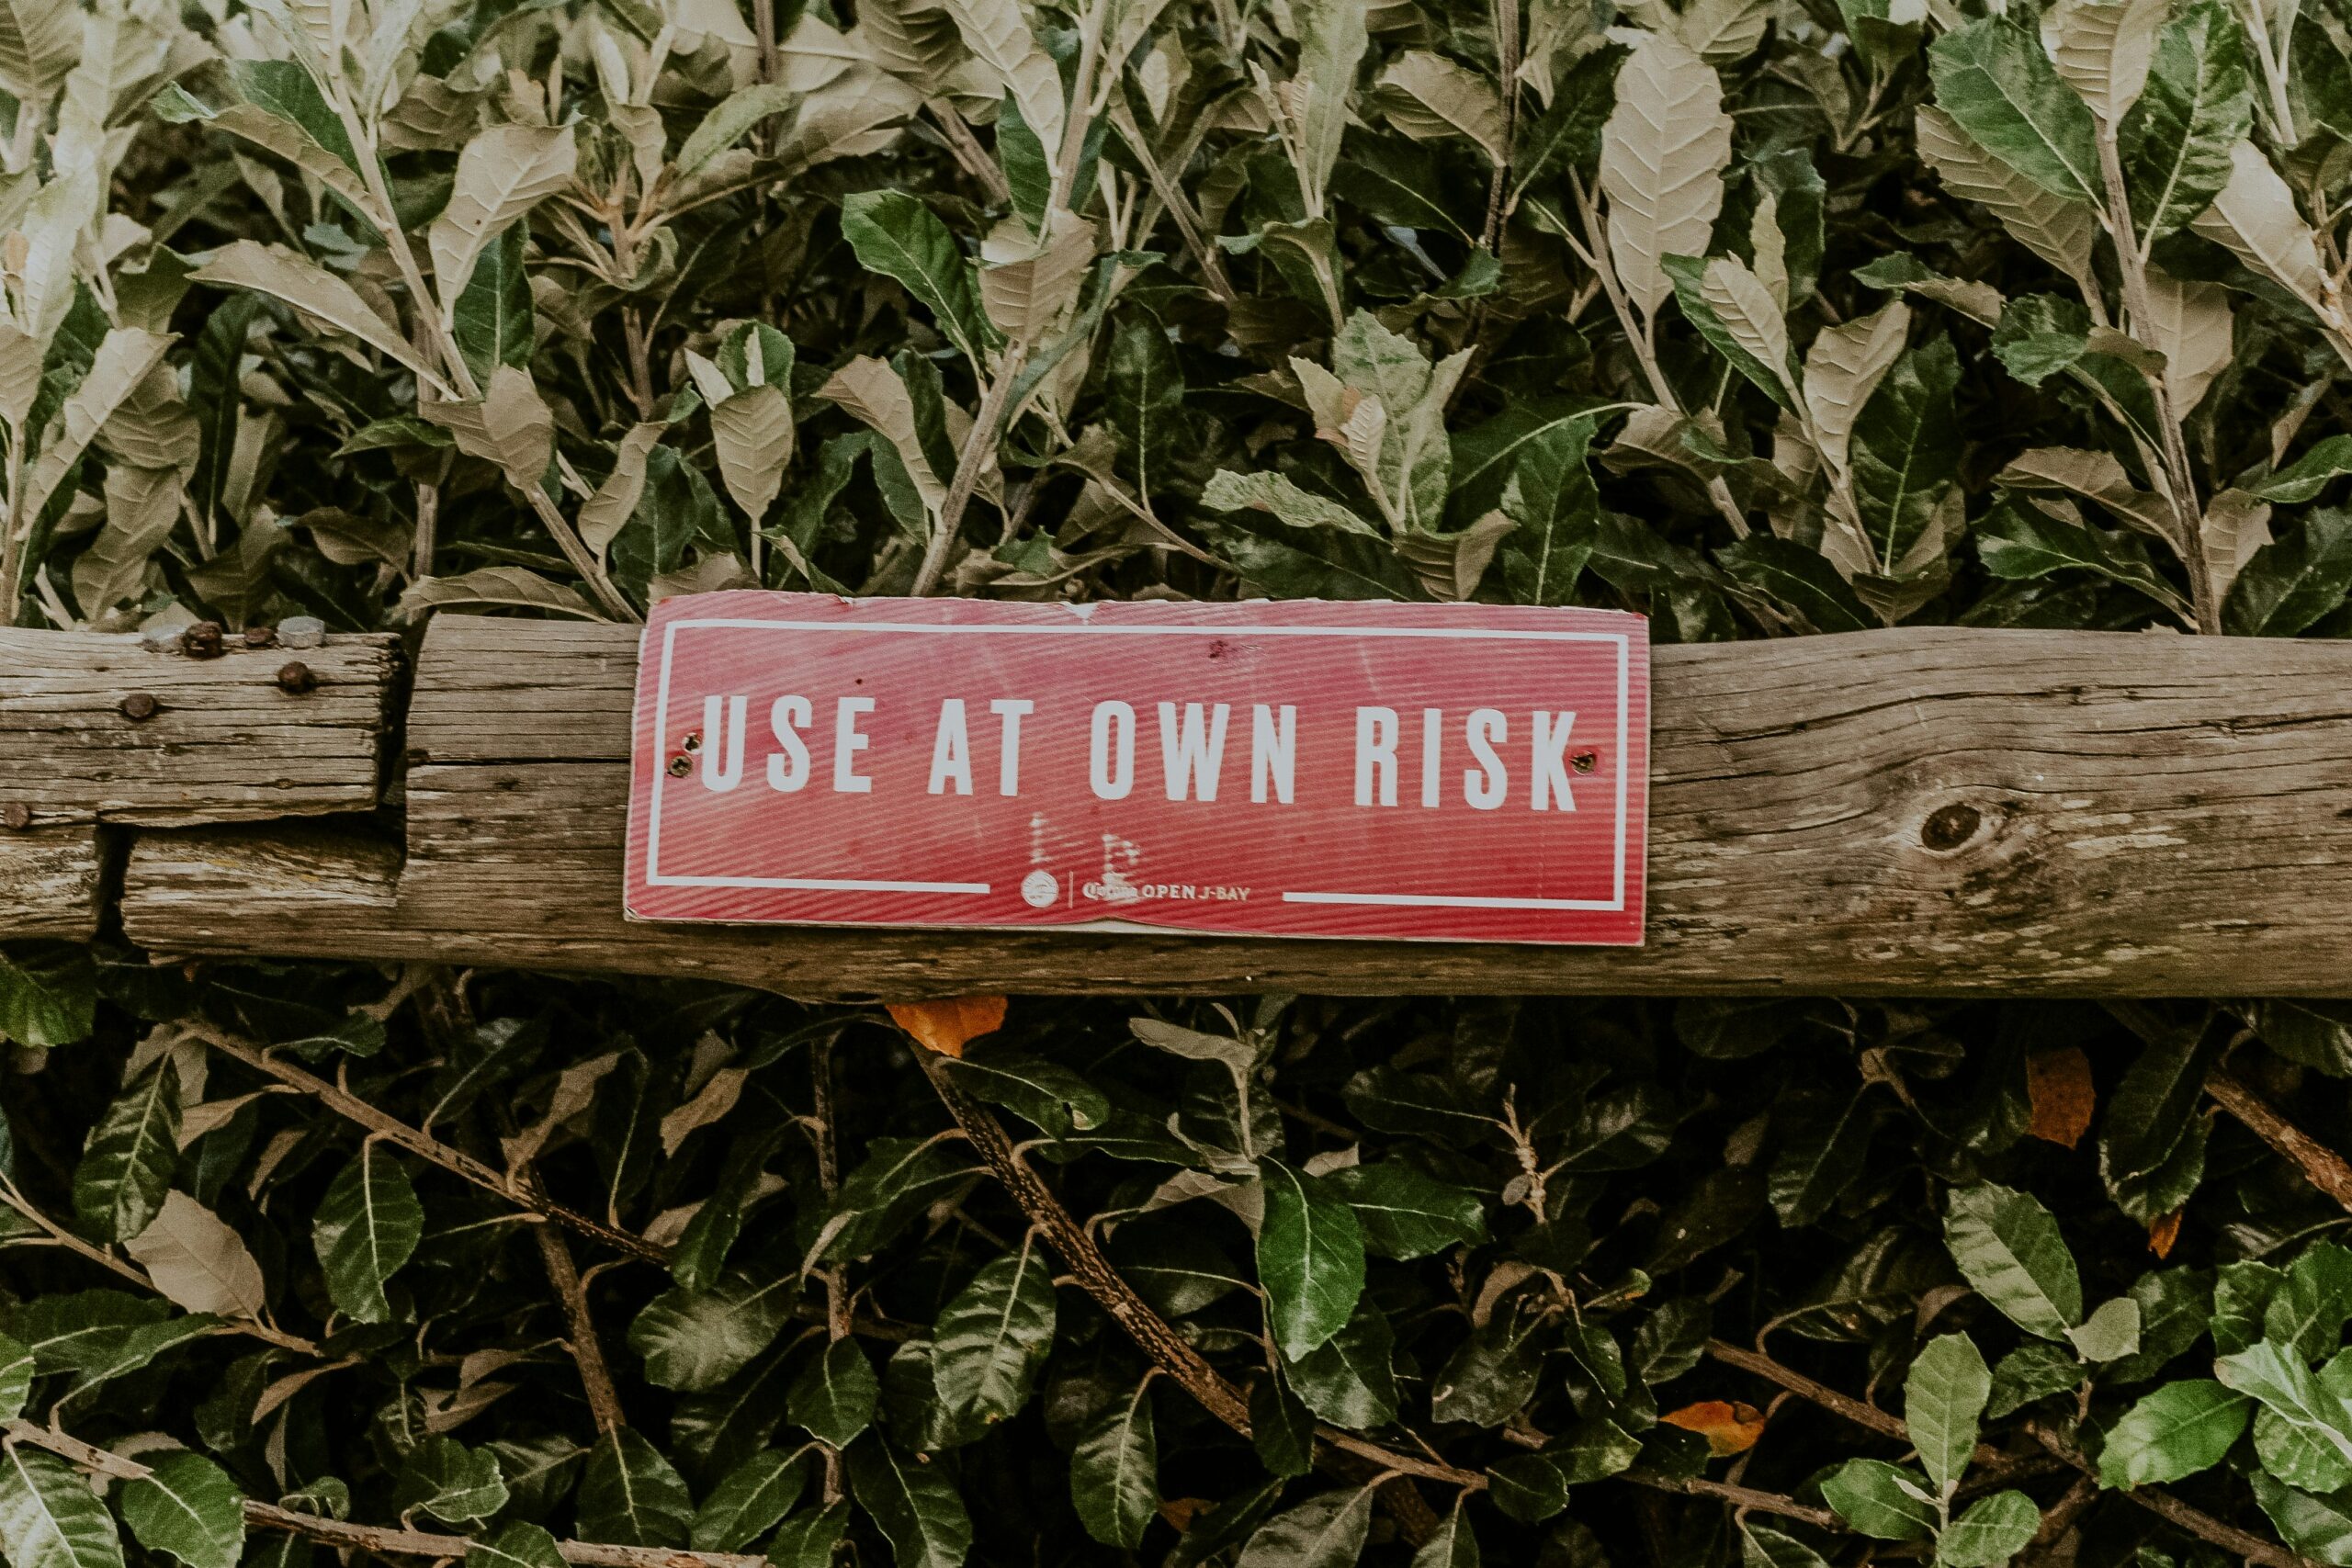 Risk behavior meaning refers to the actions, decisions, and behaviors we engage in when faced with uncertainty and potential negative outcomes.